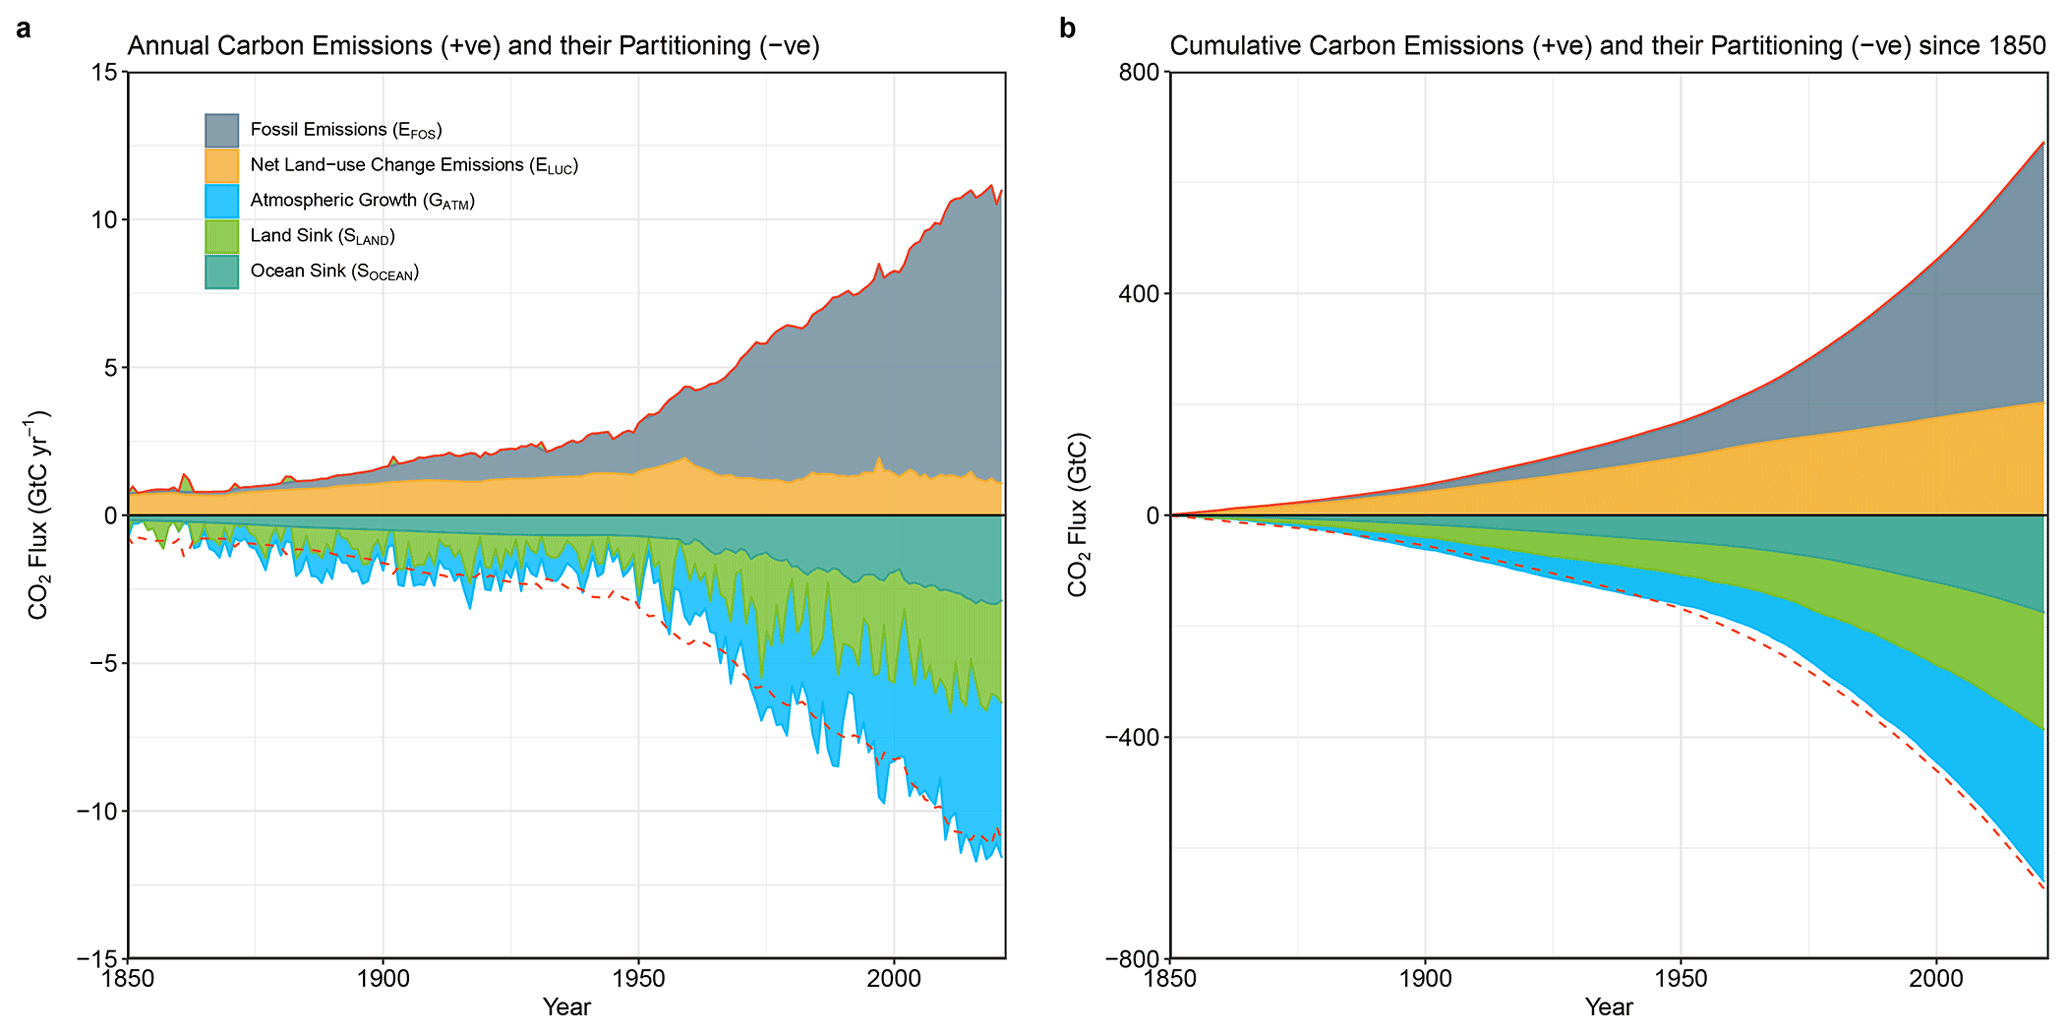 Combined components of the global carbon budget illustrated in Fig. 2 as a function of time for fossil CO2 emissions (EFOS, including a small sink from cement carbonation; grey) and emissions from land-use change (ELUC; brown), as well as their partitioning among the atmosphere (GATM; cyan), ocean (SOCEAN; blue), and land (SLAND; green). Panel (a) shows annual estimates of each flux, and panel (b) shows the cumulative flux (the sum of all prior annual fluxes) since the year 1850. The partitioning is based on nearly independent estimates from observations (for GATM) and from process model ensembles constrained by data (for SOCEAN and SLAND) and does not exactly add up to the sum of the emissions, resulting in a budget imbalance (BIM), which is represented by the difference between the bottom red line (mirroring total emissions) and the sum of carbon fluxes in the ocean, land, and atmosphere reservoirs. All data are in GtC yr−1 (a) and GtC (b). The EFOS estimate is based on a mosaic of different data sets and has an uncertainty of ±5 % (±1σ). The ELUC estimate is from three bookkeeping models (Table 4) with uncertainty of ±0.7 GtC yr−1. The GATM estimates prior to 1959 are from Joos and Spahni (2008) with uncertainties equivalent to about ±0.1–0.15 GtC yr−1 and from Dlugokencky and Tans (2022) since 1959 with uncertainties of about +-0.07 GtC yr−1 during 1959–1979 and ± 0.02 GtC yr−1 since 1980. The SOCEAN estimate is the average from Khatiwala et al. (2013) and DeVries (2014) with uncertainty of about ±30 % prior to 1959, and the average of an ensemble of models and an ensemble of fCO2 data products (Table 4) with uncertainties of about ±0.4 GtC yr−1 since 1959. The SLAND estimate is the average of an ensemble of models (Table 4) with uncertainties of about ±1 GtC yr−1. See the text for more details of each component and their uncertainties. Graphic: Friedlingstein, et al., 2022 / Earth System Science Data